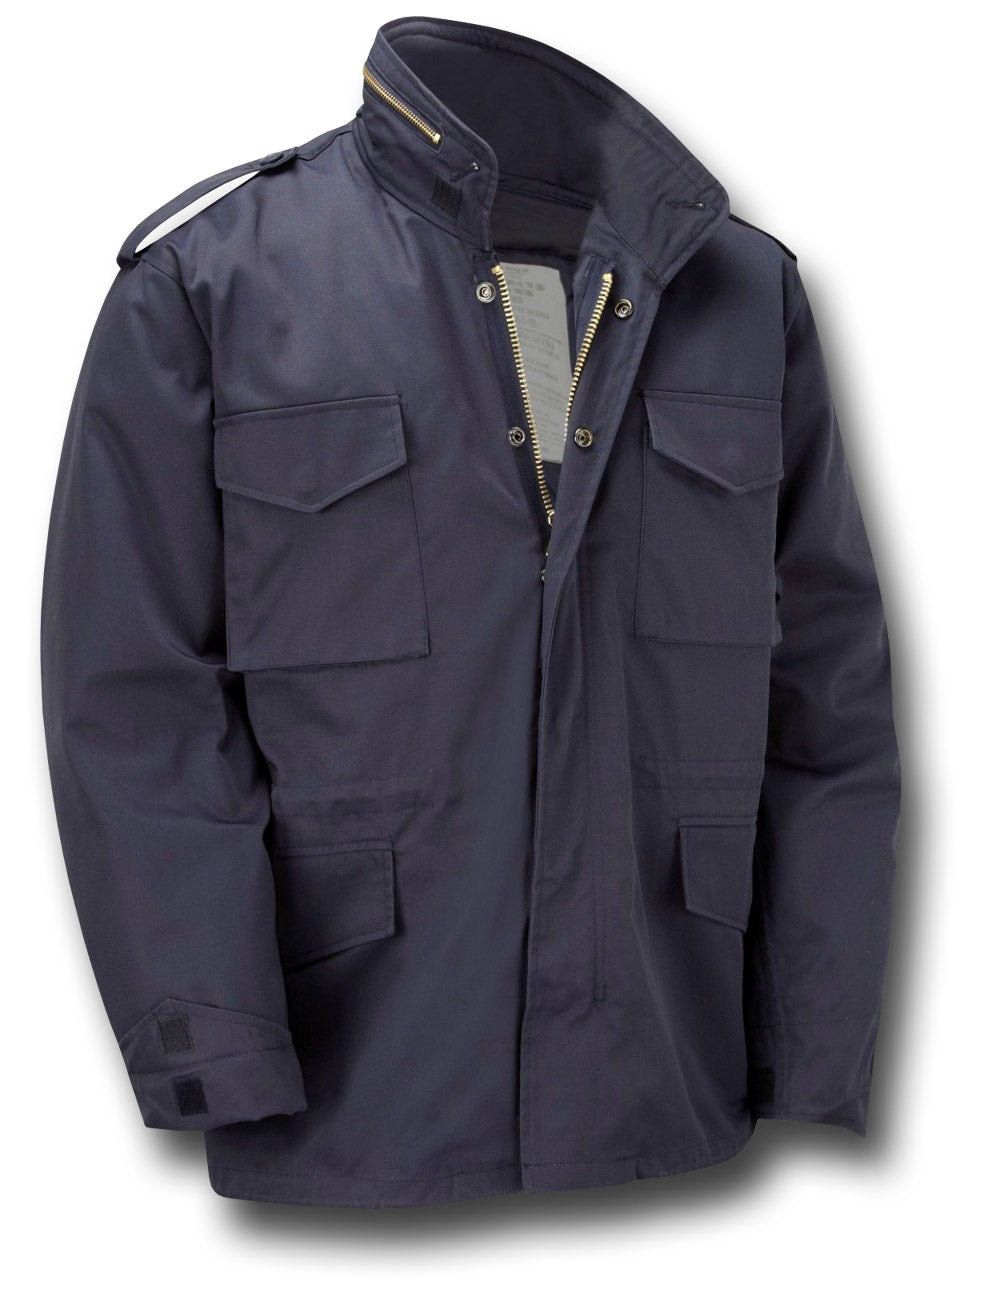 M65 STYLE JACKET WITH LINER - NAVY